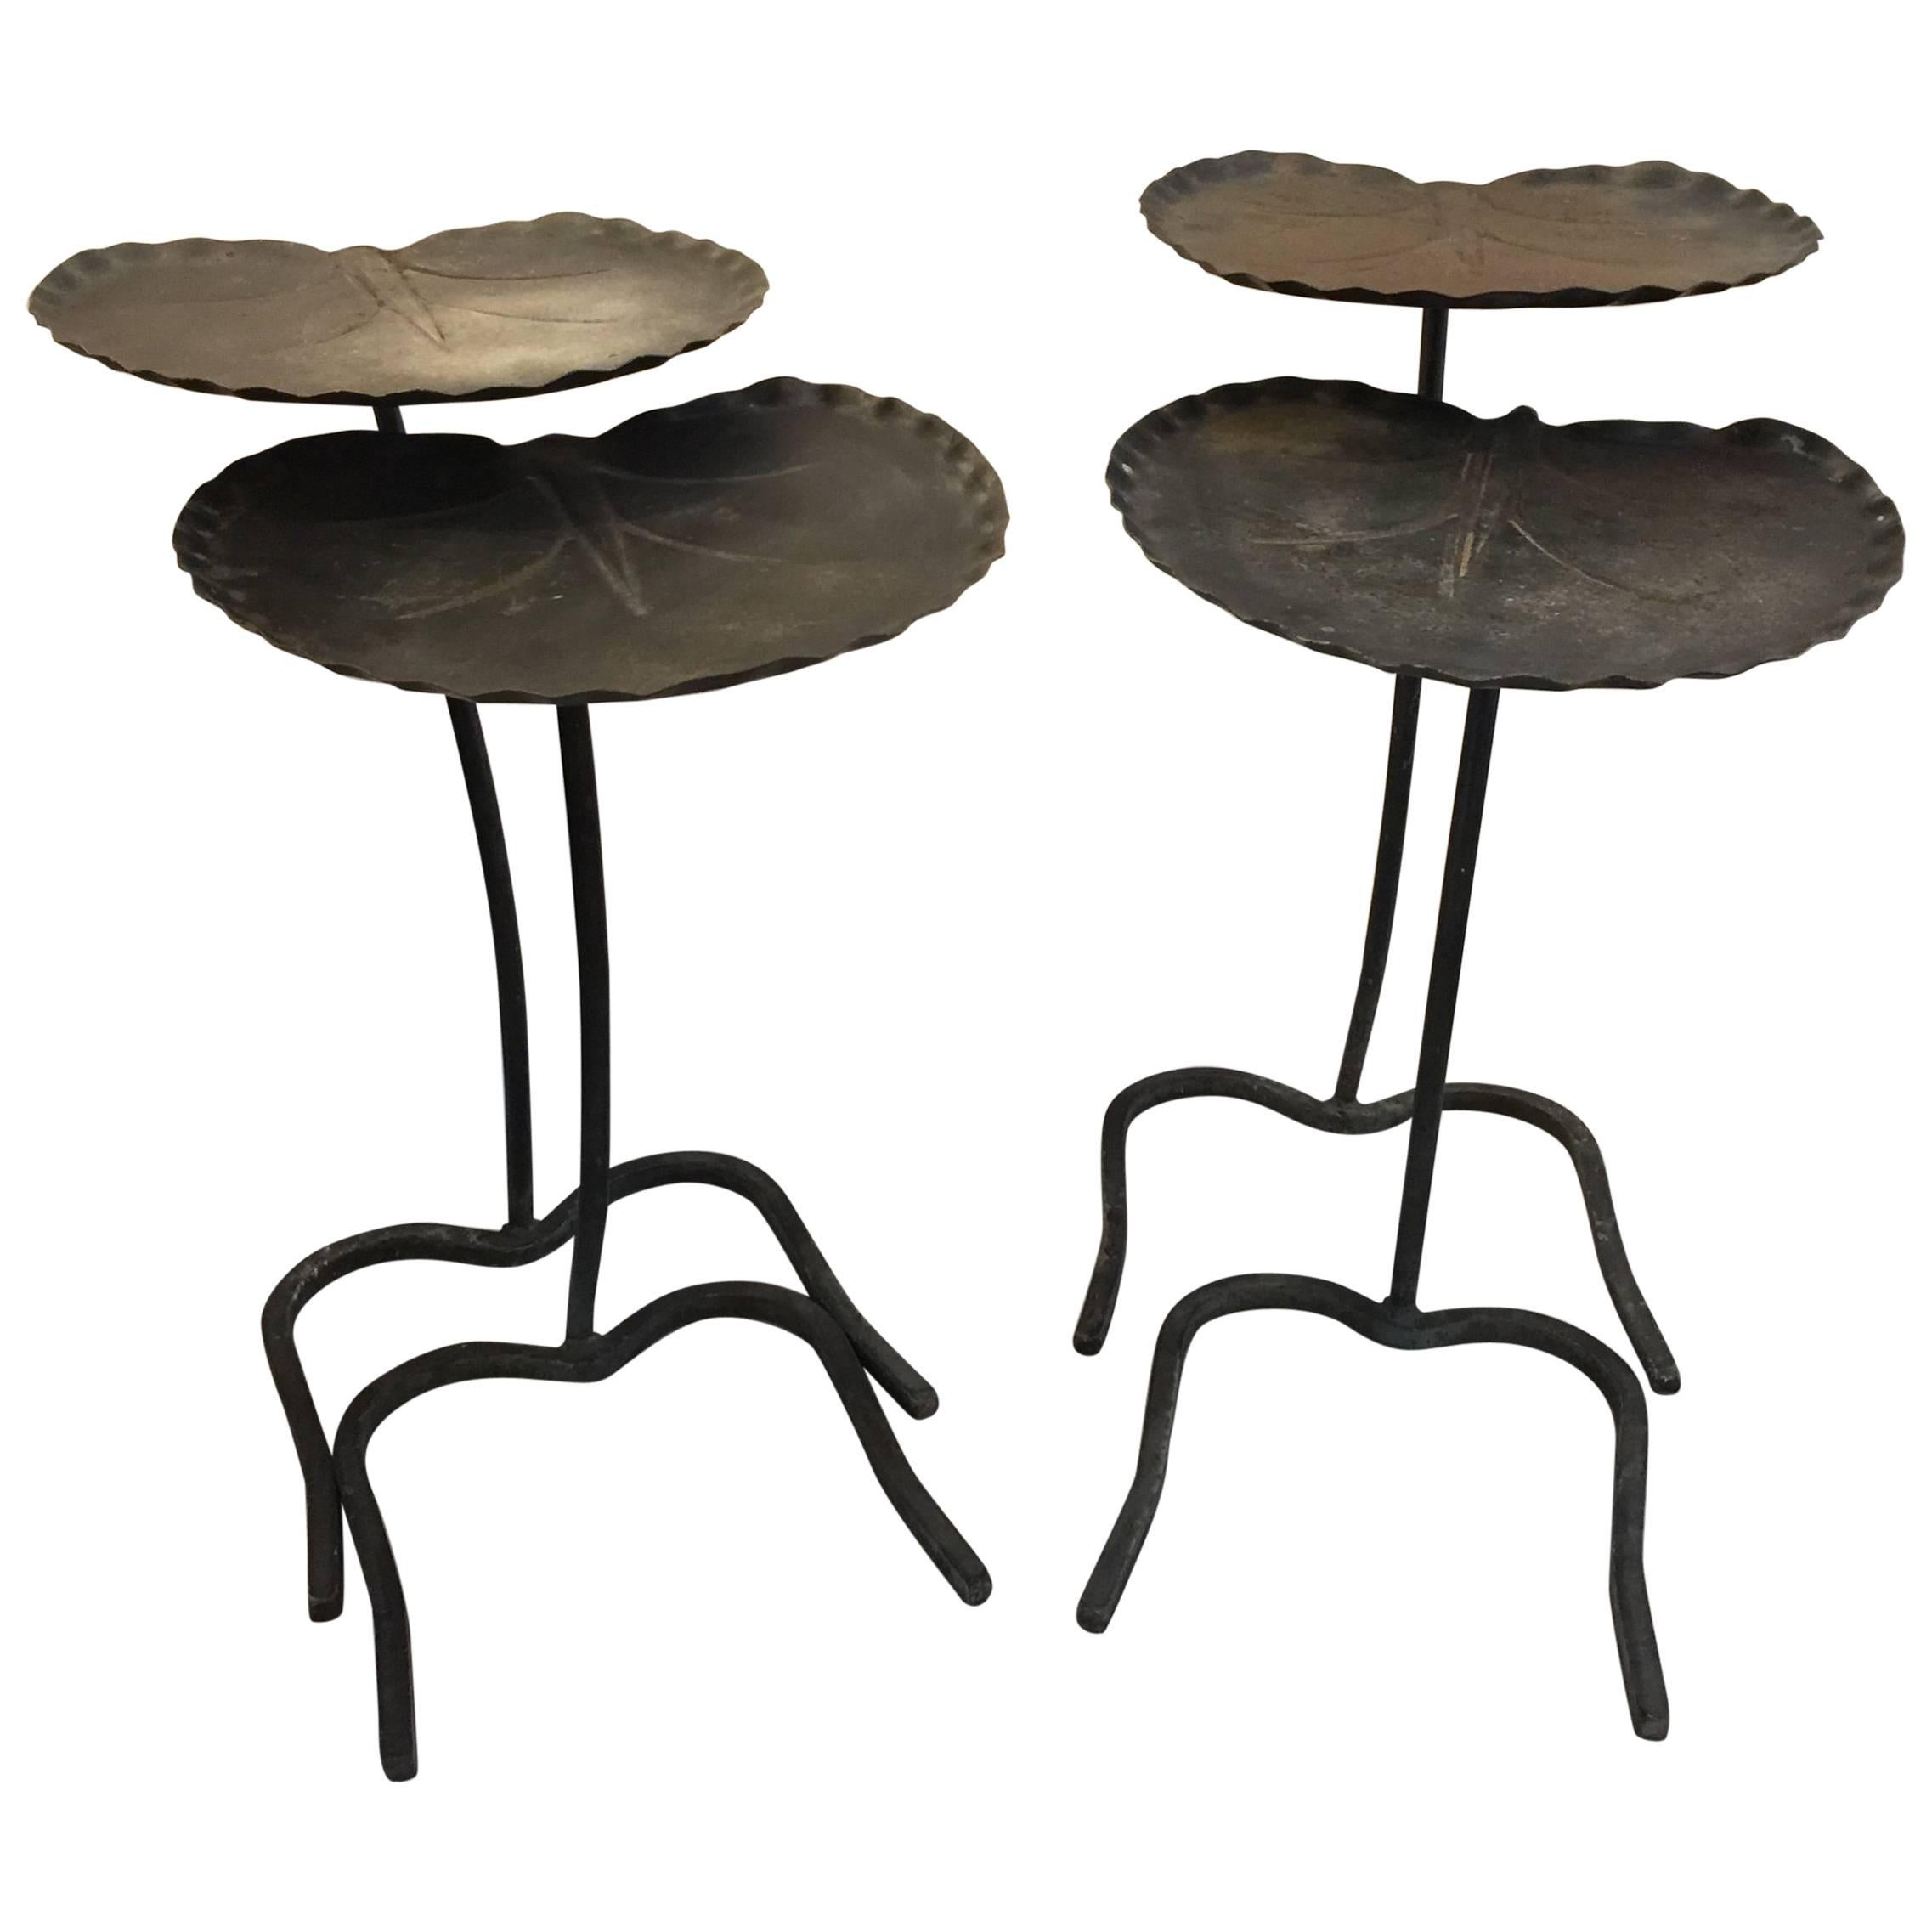 Two Sets of Salterini Lily Pad Nesting Tables